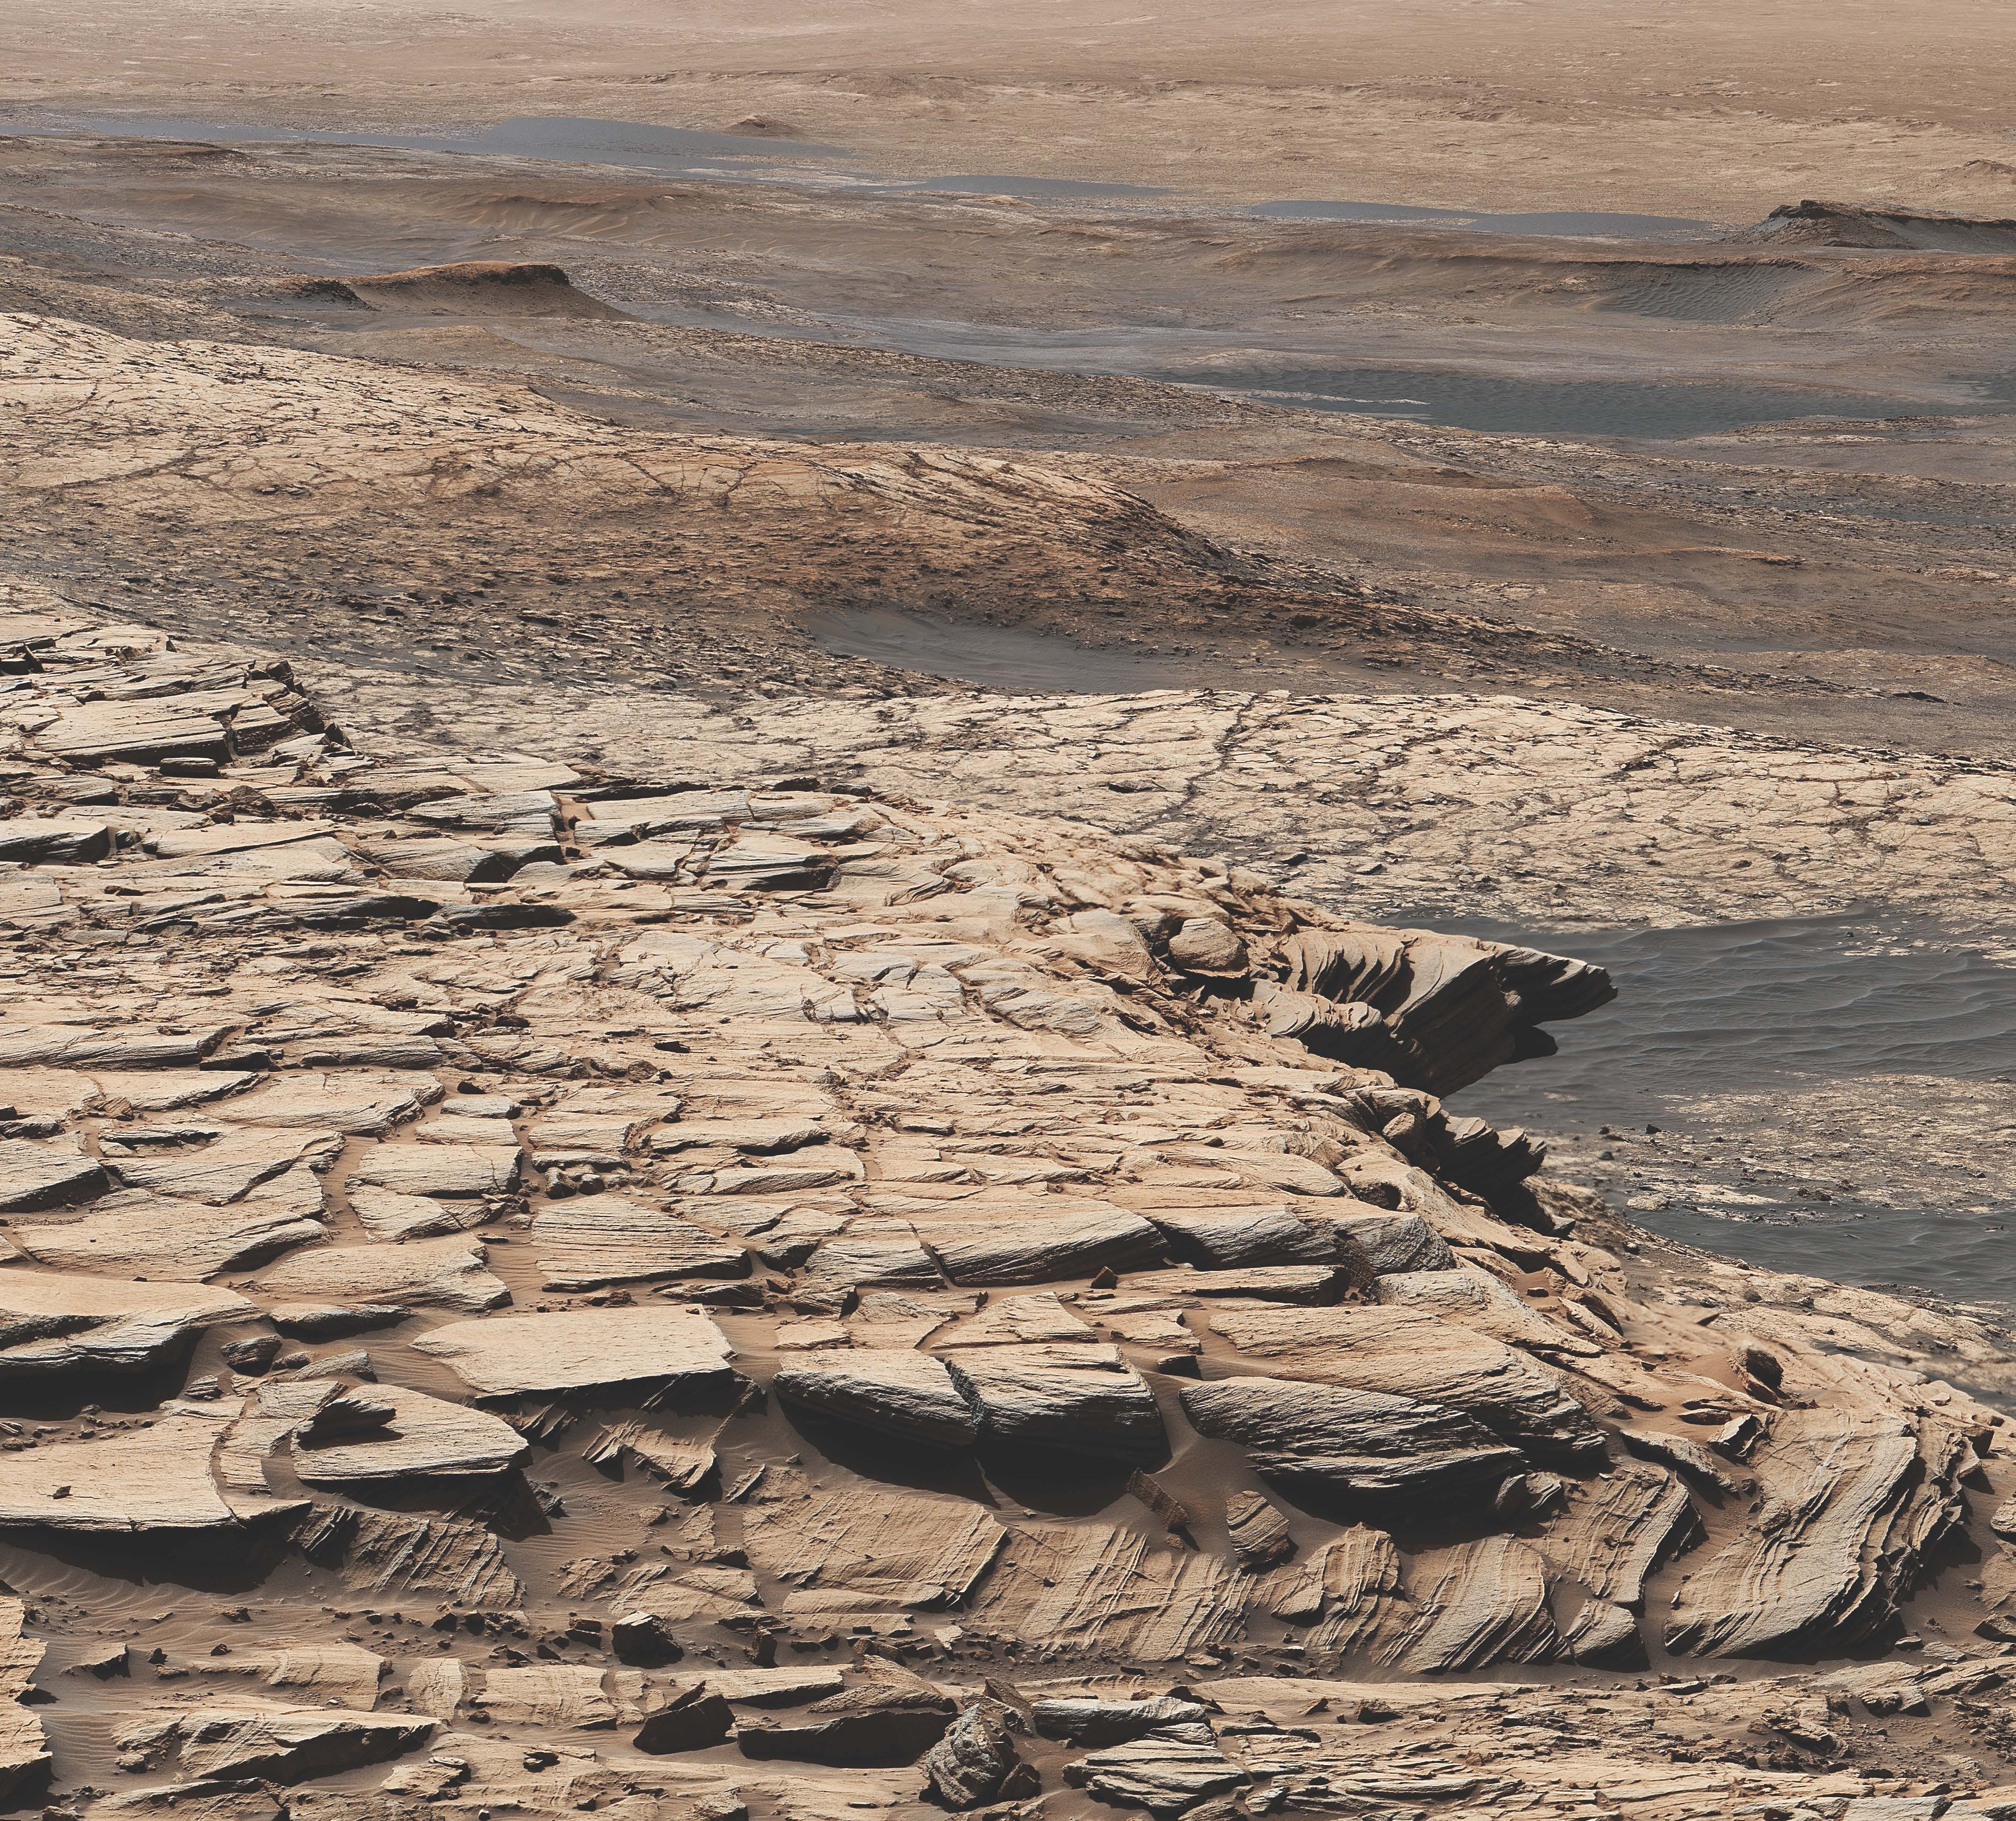 This mosaic was made from images taken by the MAST camera aboard NASA's Curiosity spacecraft on Mars Day 2729, or the first day of the mission.  Landscape shows the Stimson sandstone formation in Gale Crater.  At this general site, Curiosity drilled the Edinburgh drill hole, a sample of which was enriched with carbon 12.